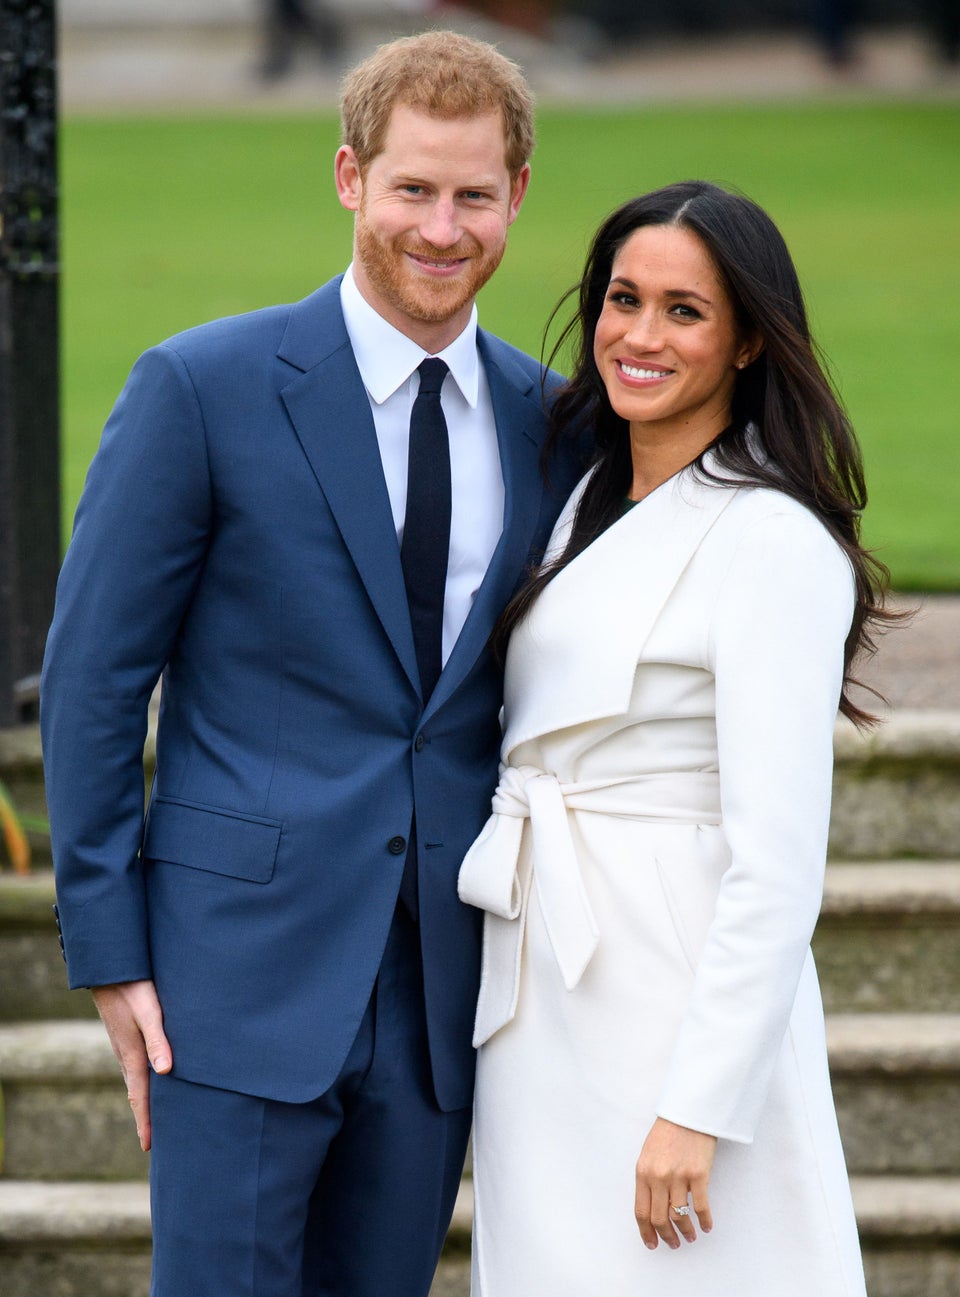 You’ll Never Guess Where Prince Harry And Meghan Markle Are Spending Valentine’s Day